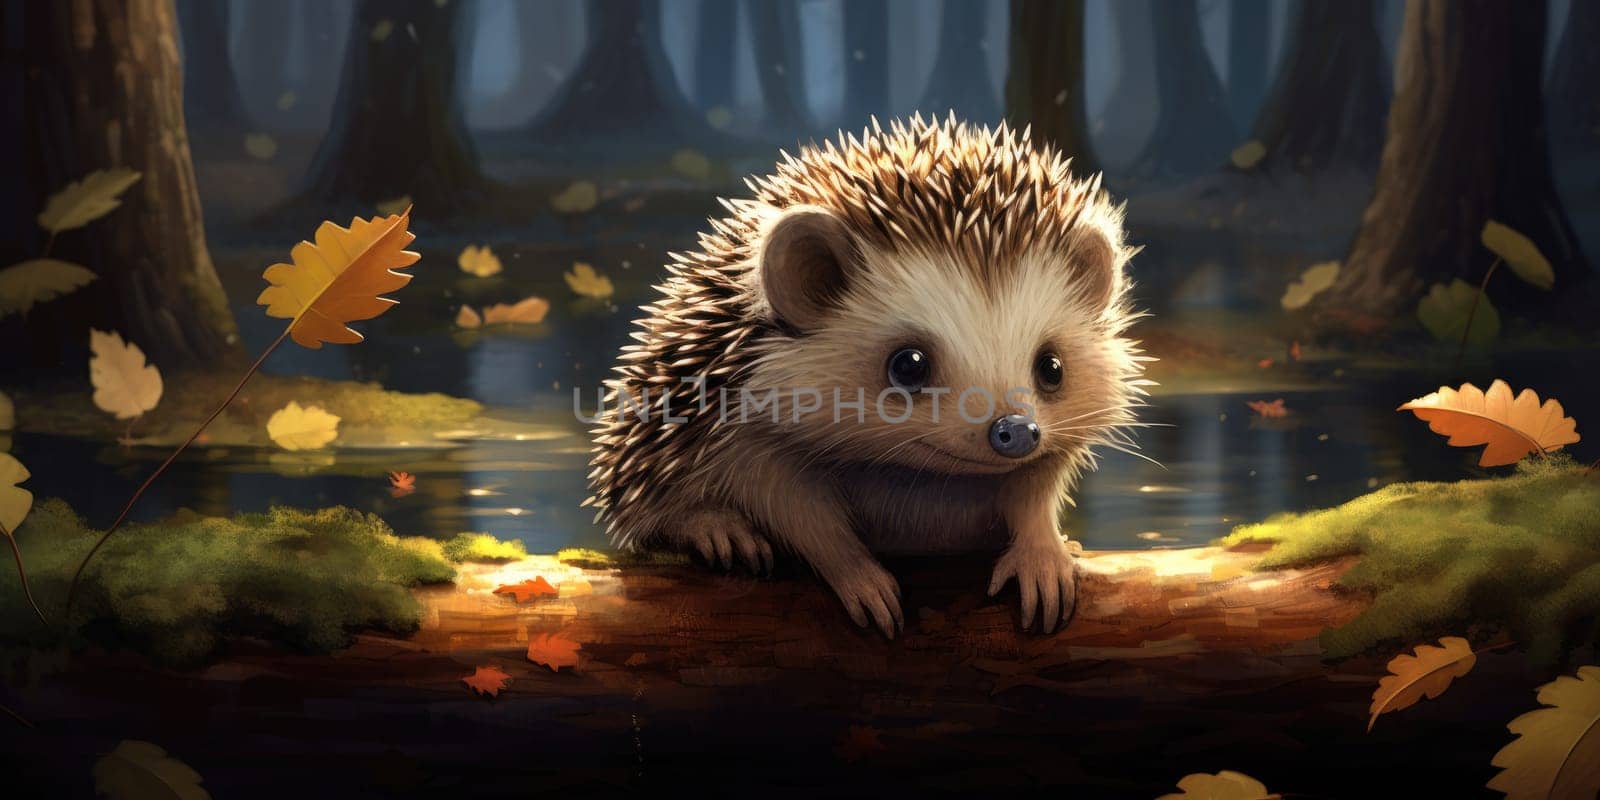 Cute hedgehog in the nature, wildlife concept by Kadula